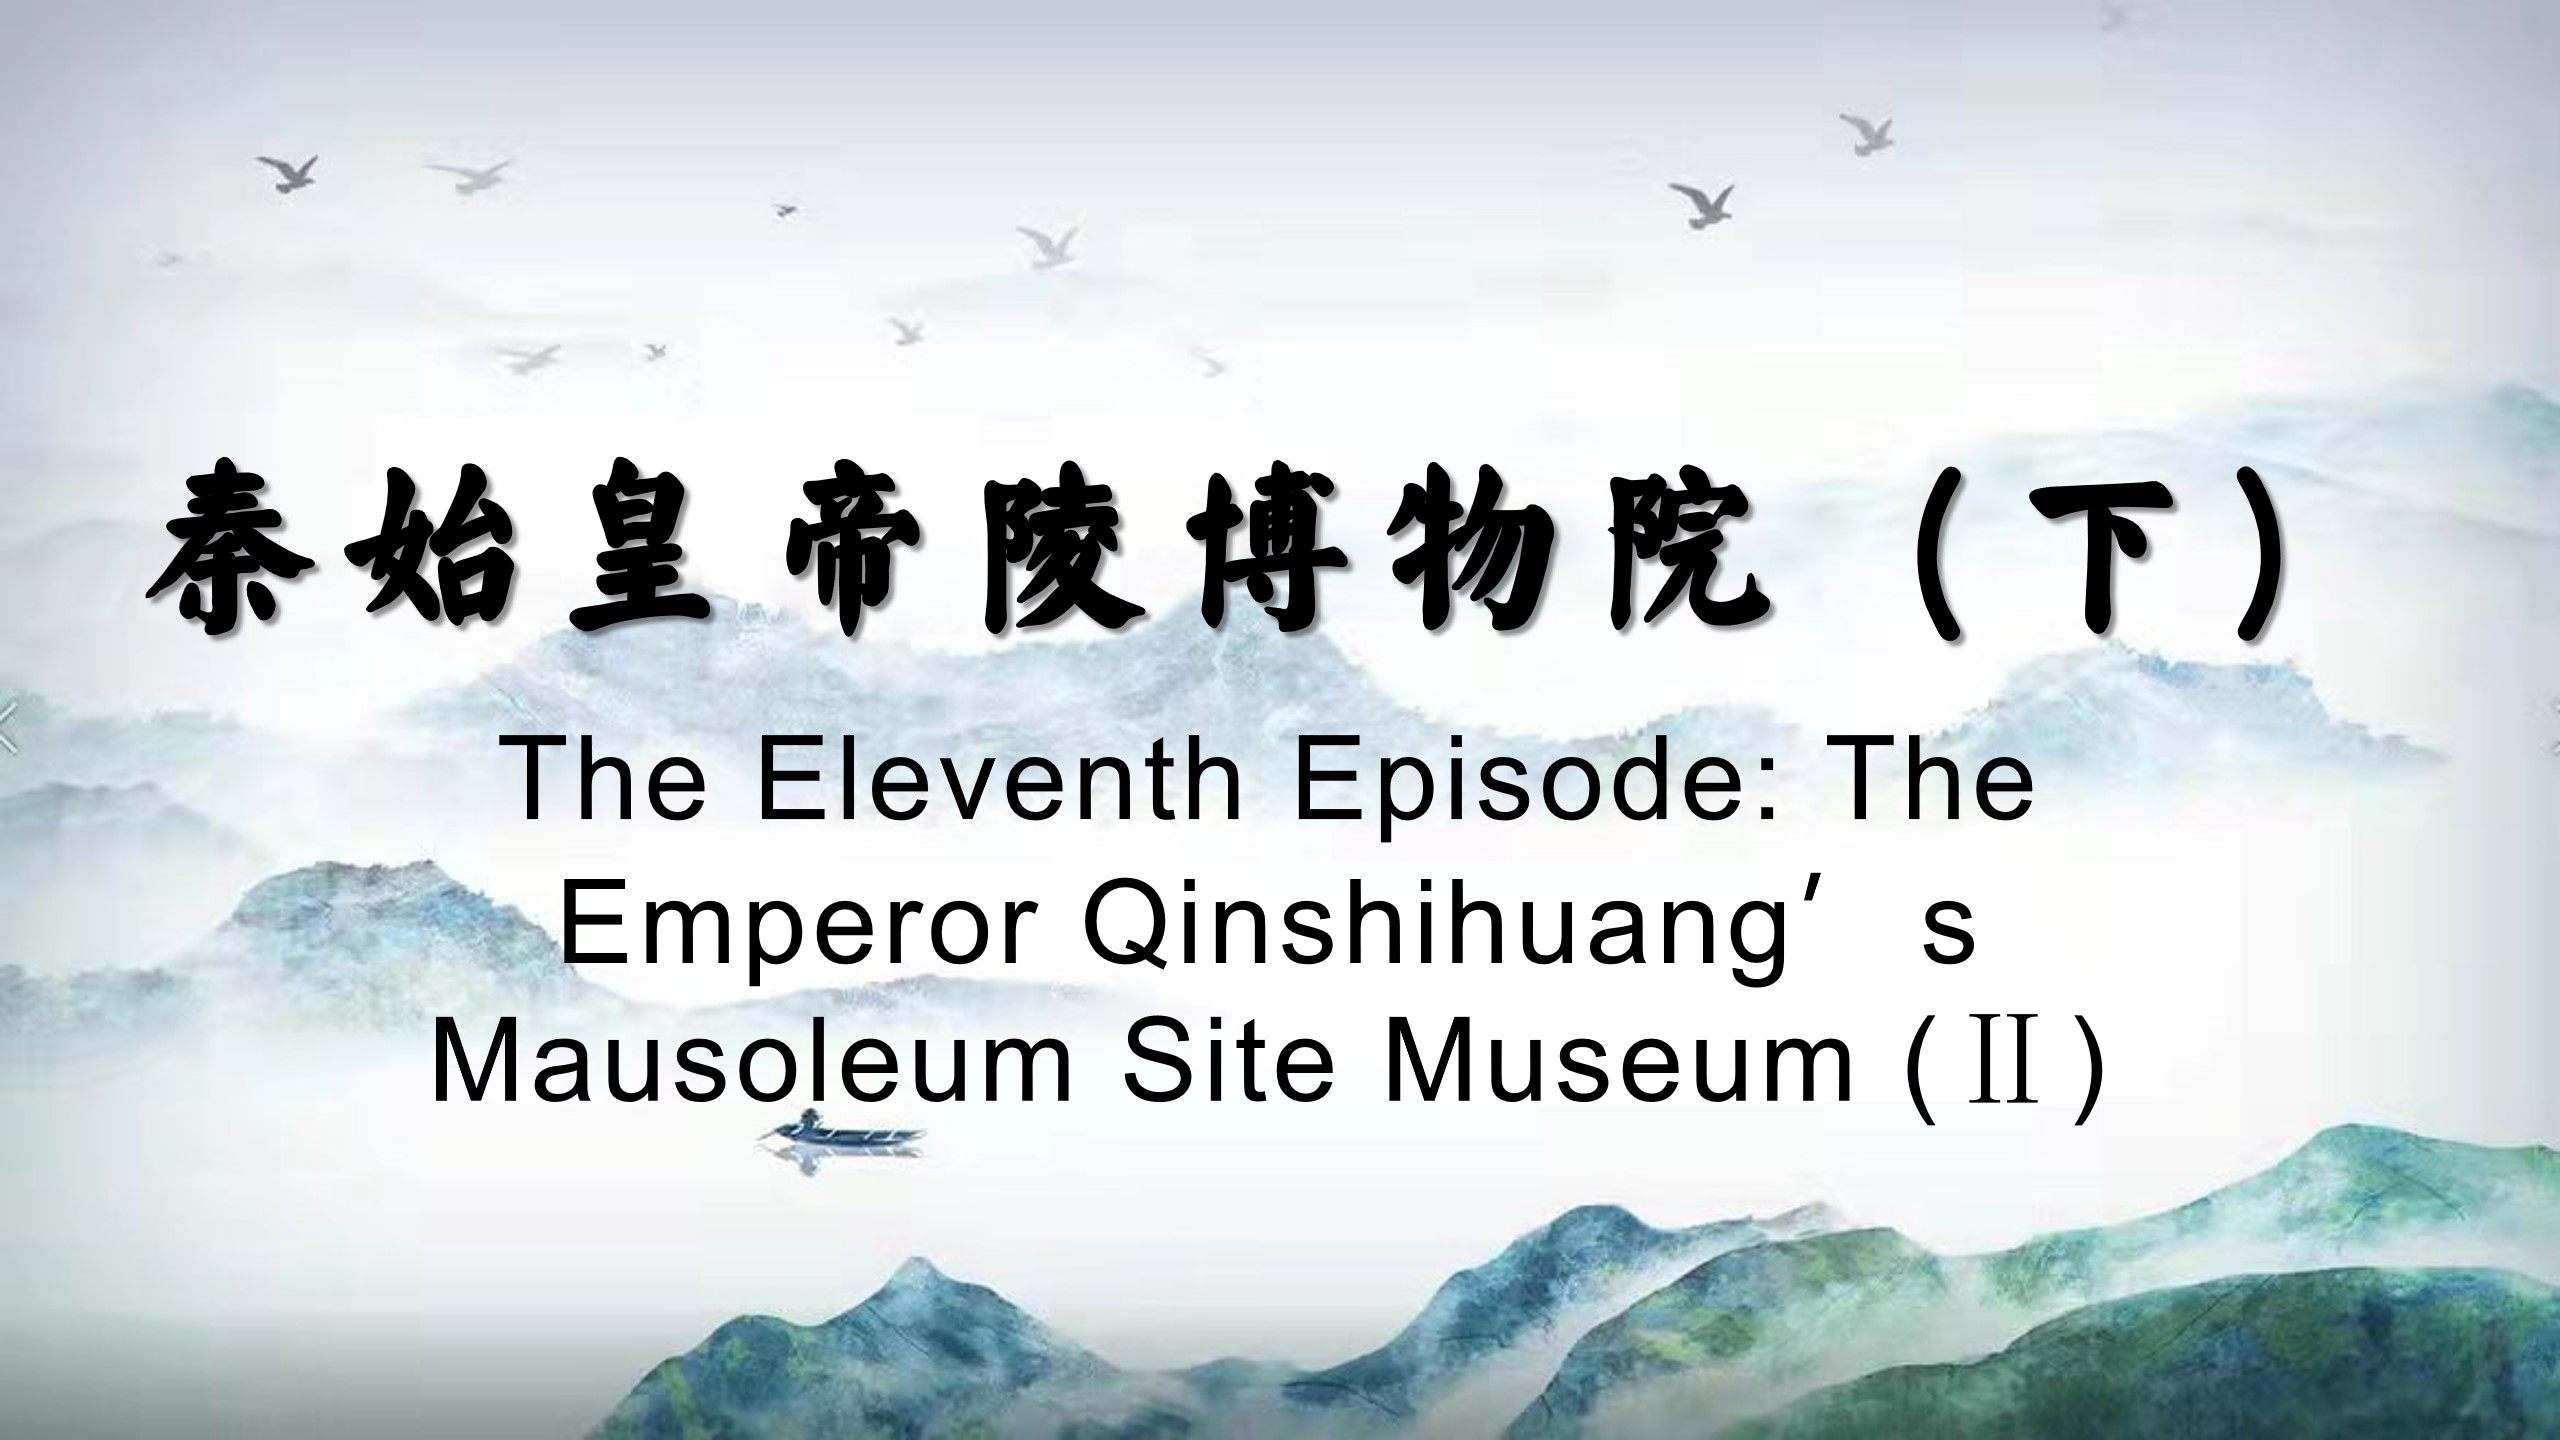 The Eleventh Episode: The Emperor Qinshihuang’s Mausoleum Site Museum (Ⅱ)